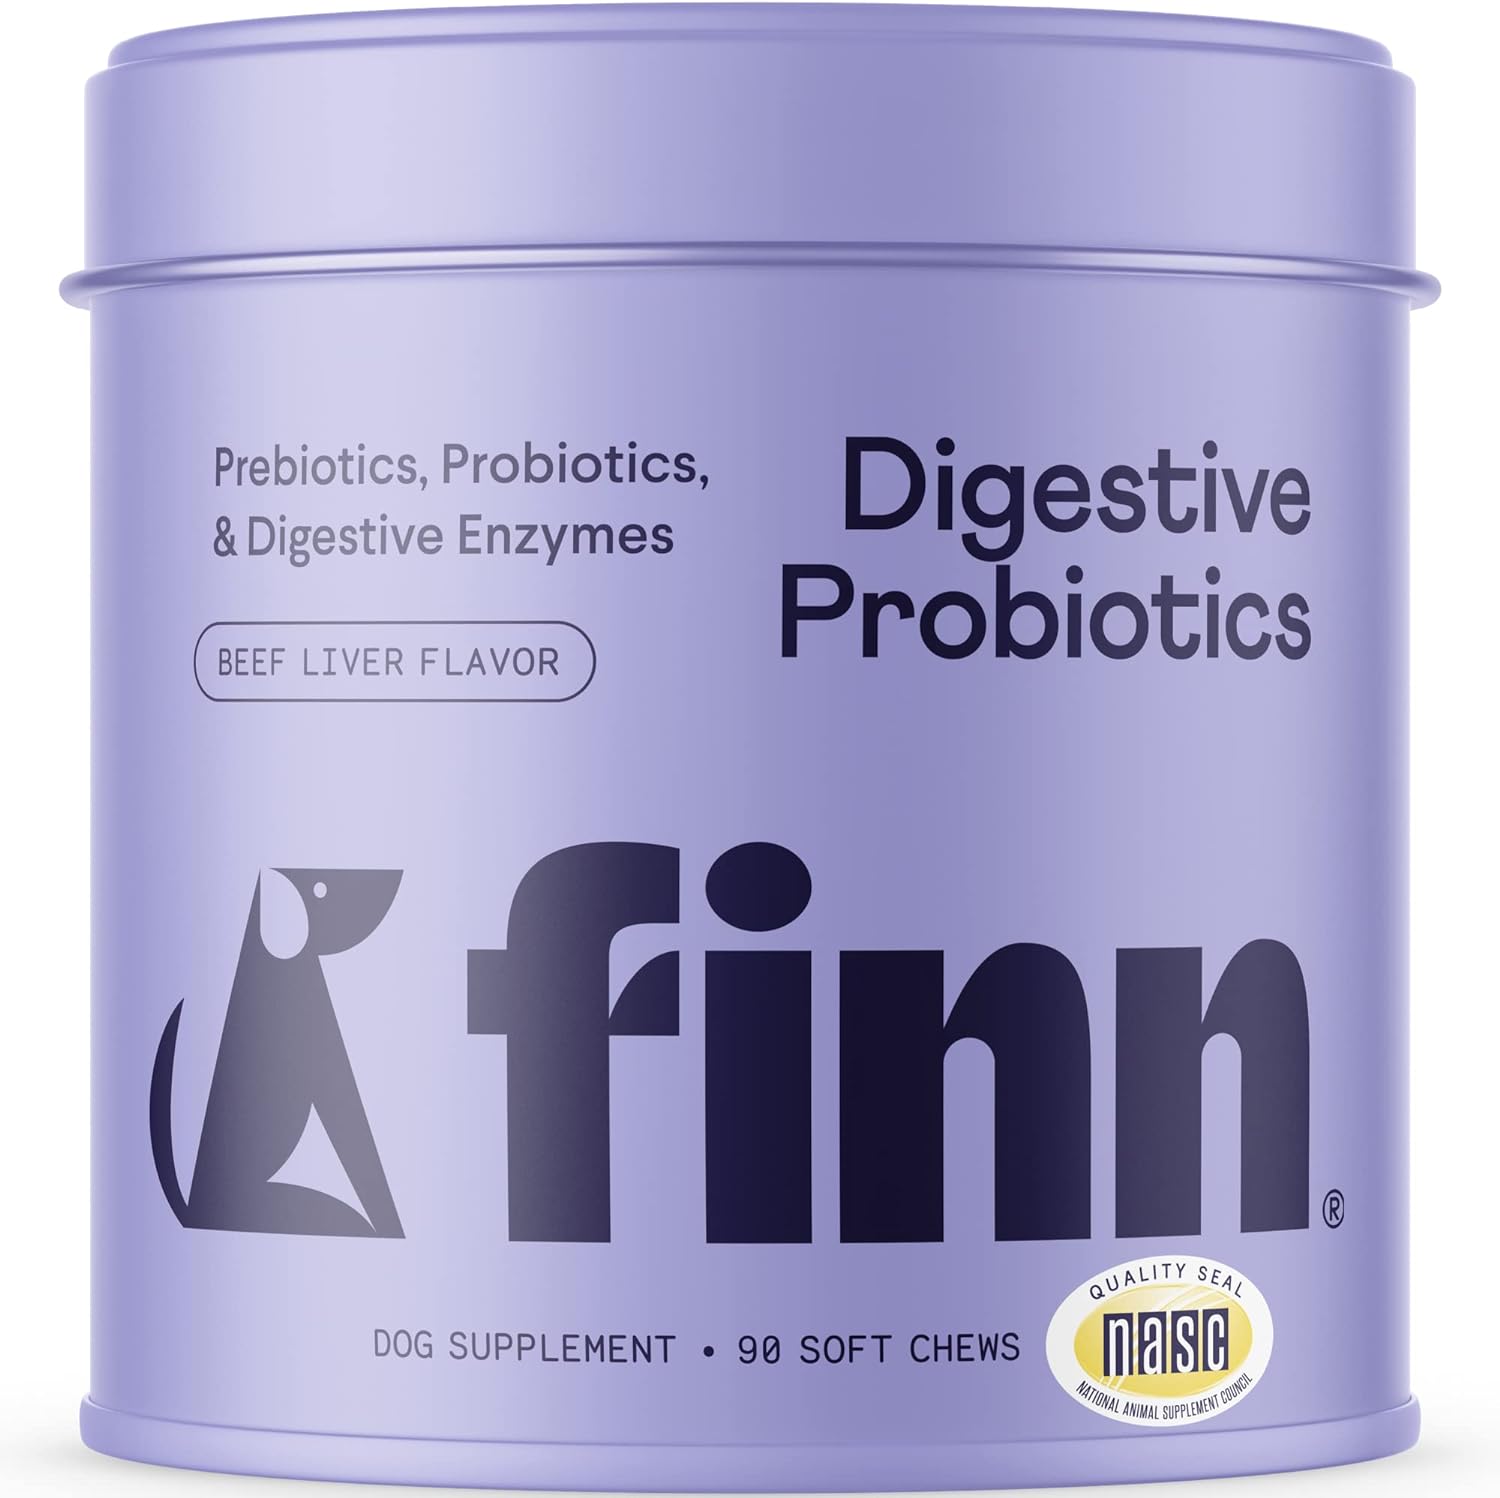 Finn Digestive Probiotics for Dogs - Complete Digestive System Support with Pumpkin, Prebiotics, & Live Probiotics - Vet Recommended & Made in The USA - 90 Soft Chews